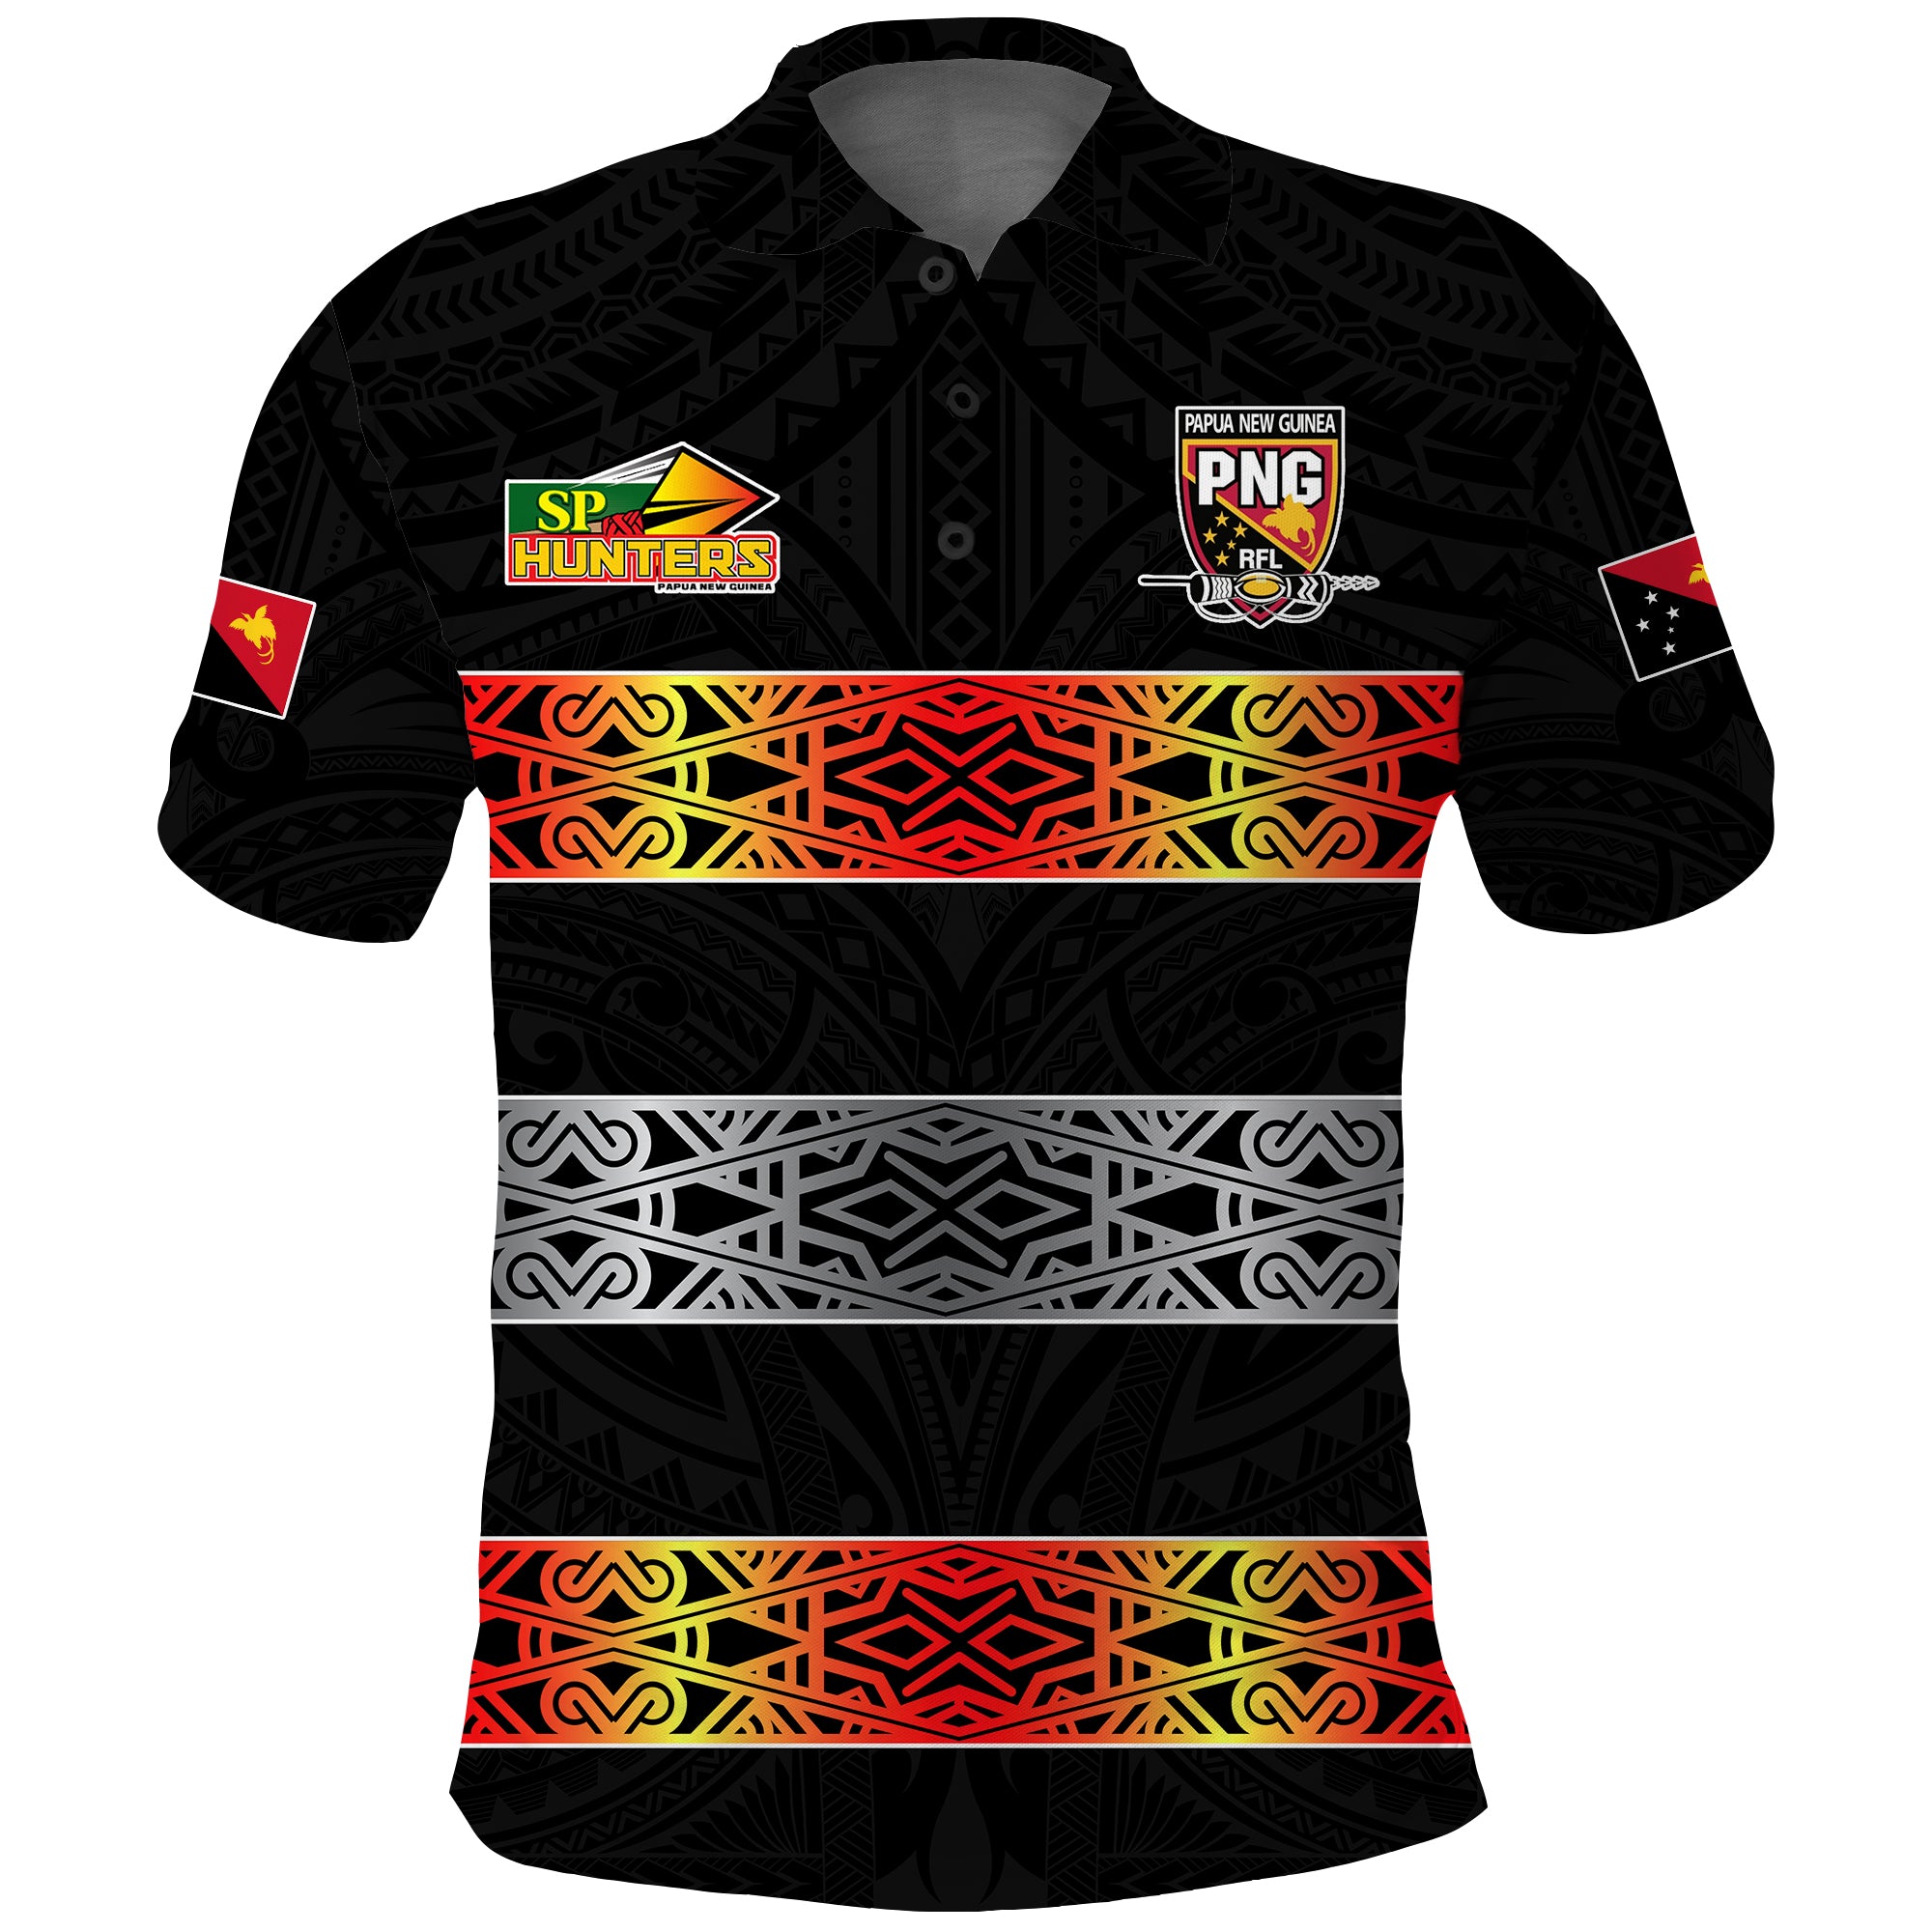 The Hunters PNG Polo Shirt Papua New Guinea Hunters Rugby LT13 Unisex Black - Polynesian Pride